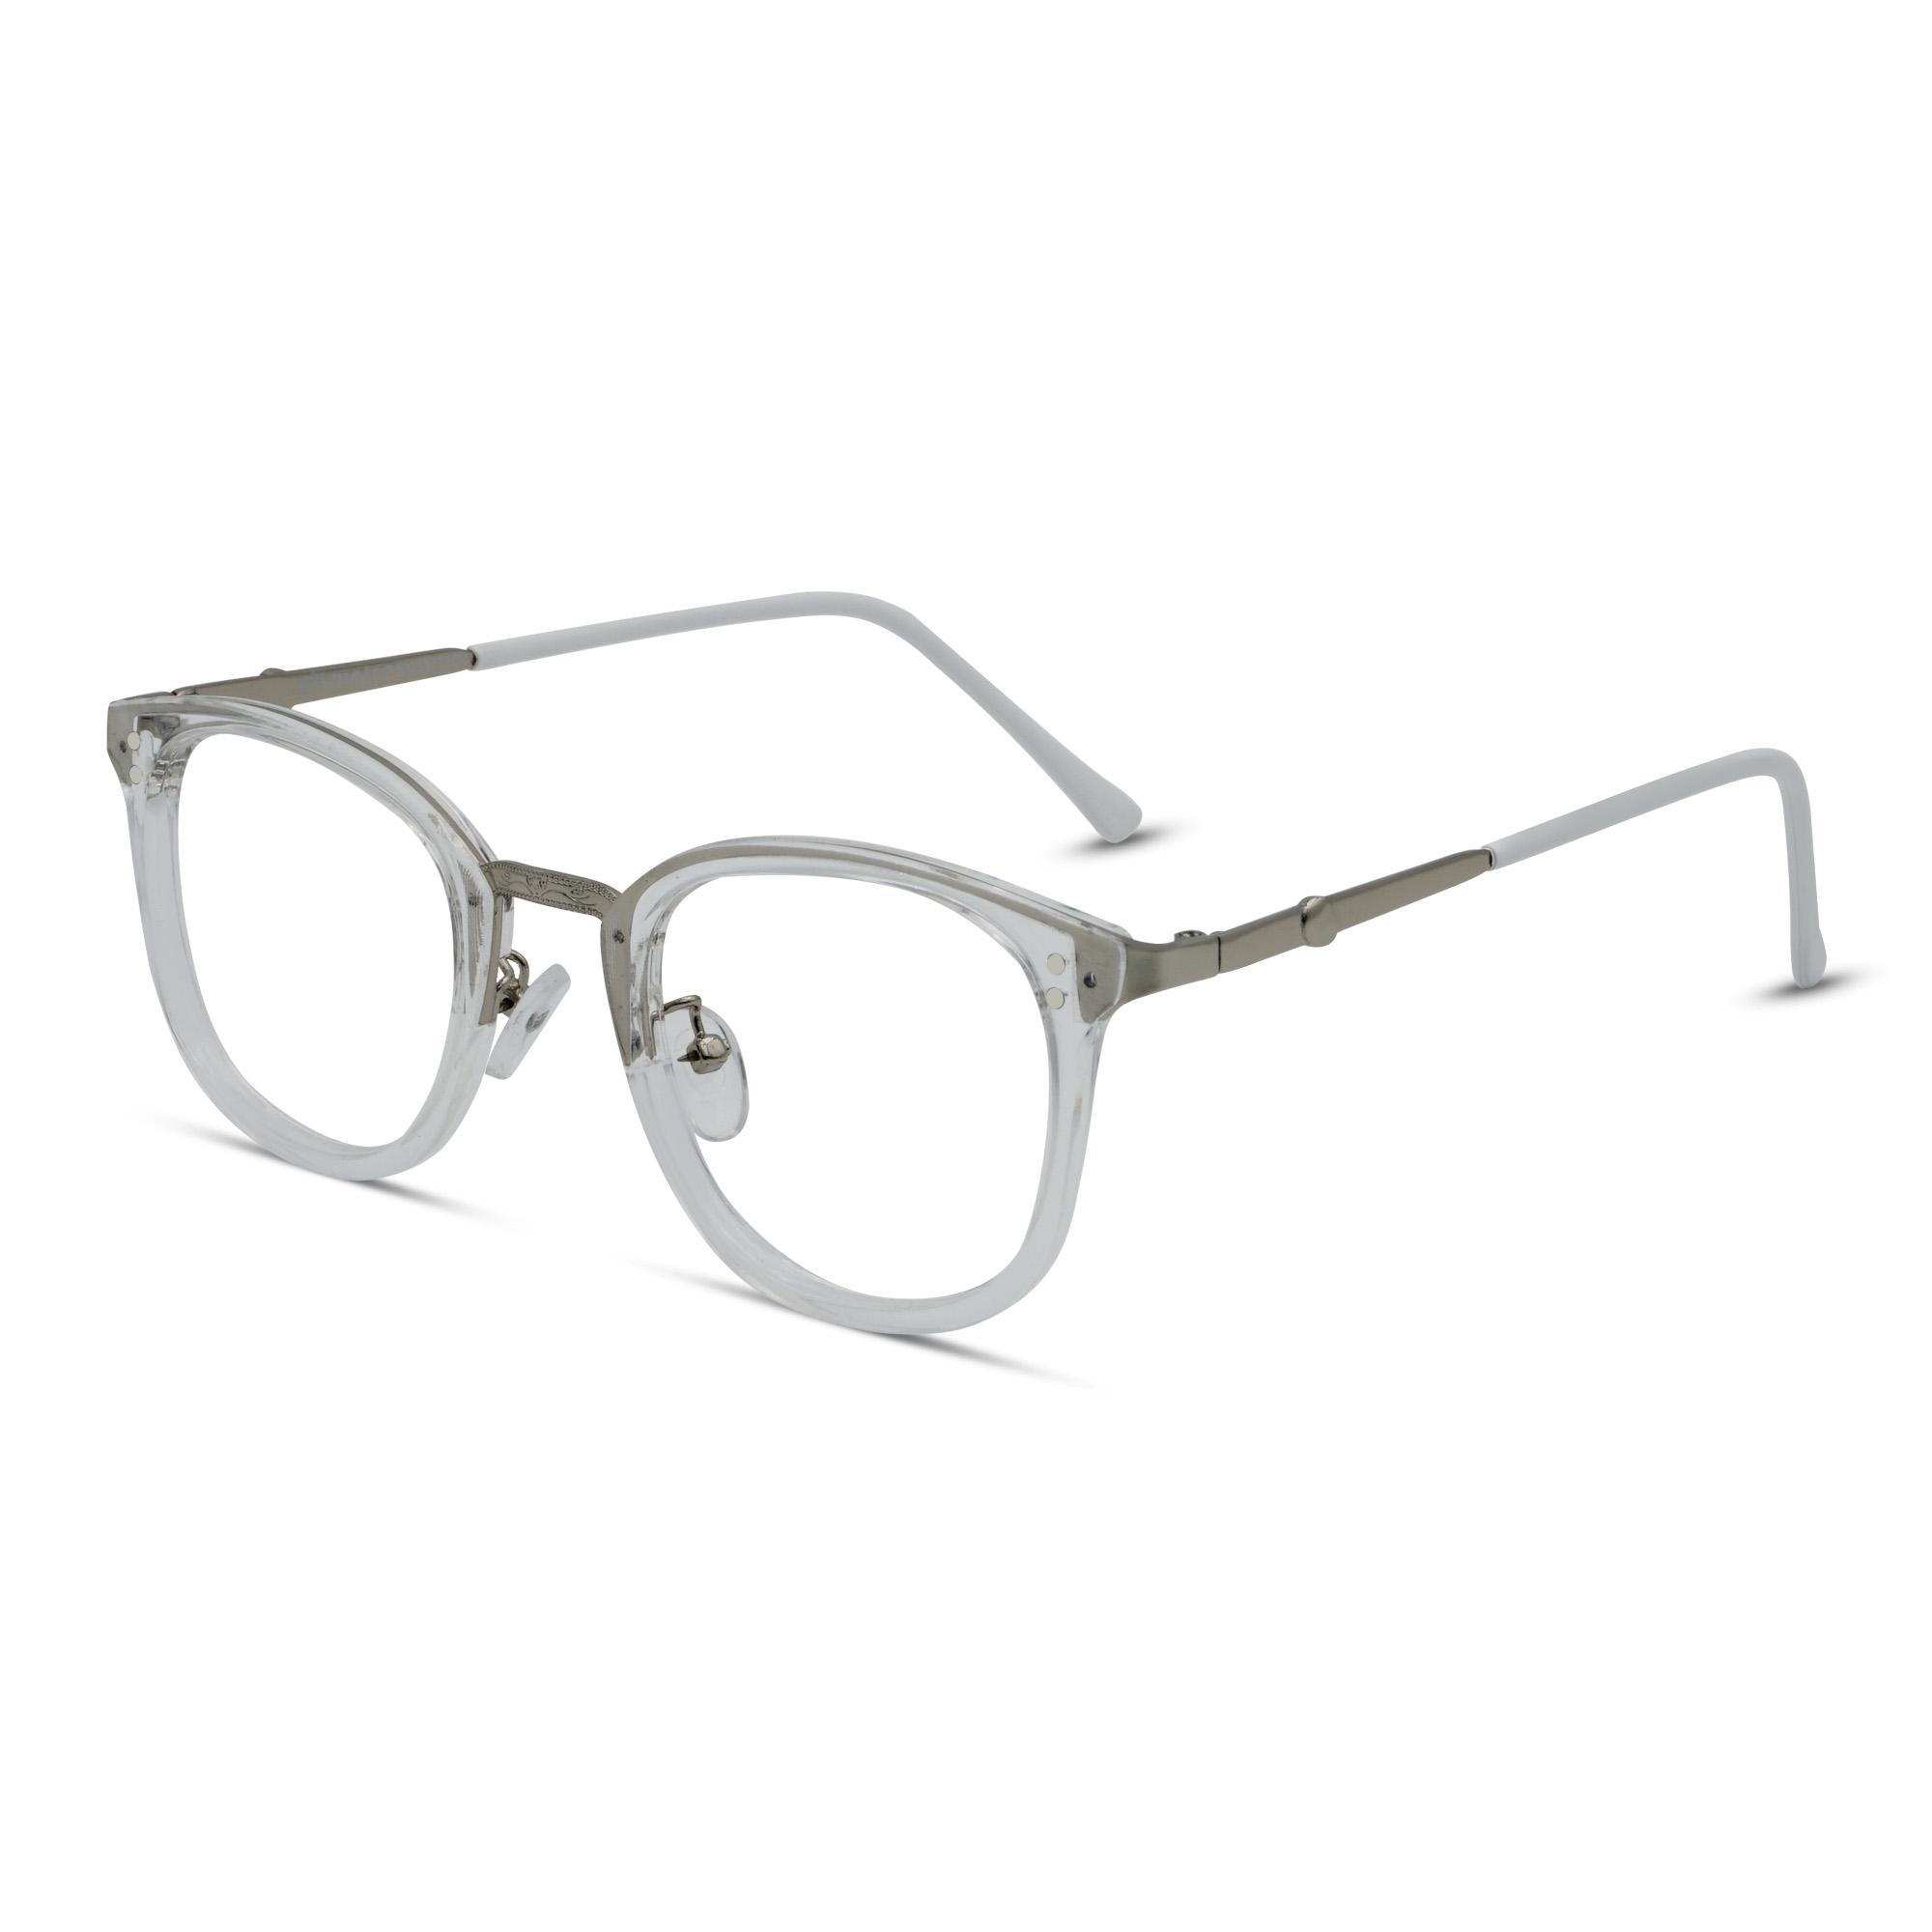 MetroSunnies Cara Specs / Eyeglasses with Replaceable Lens / Fashion ...